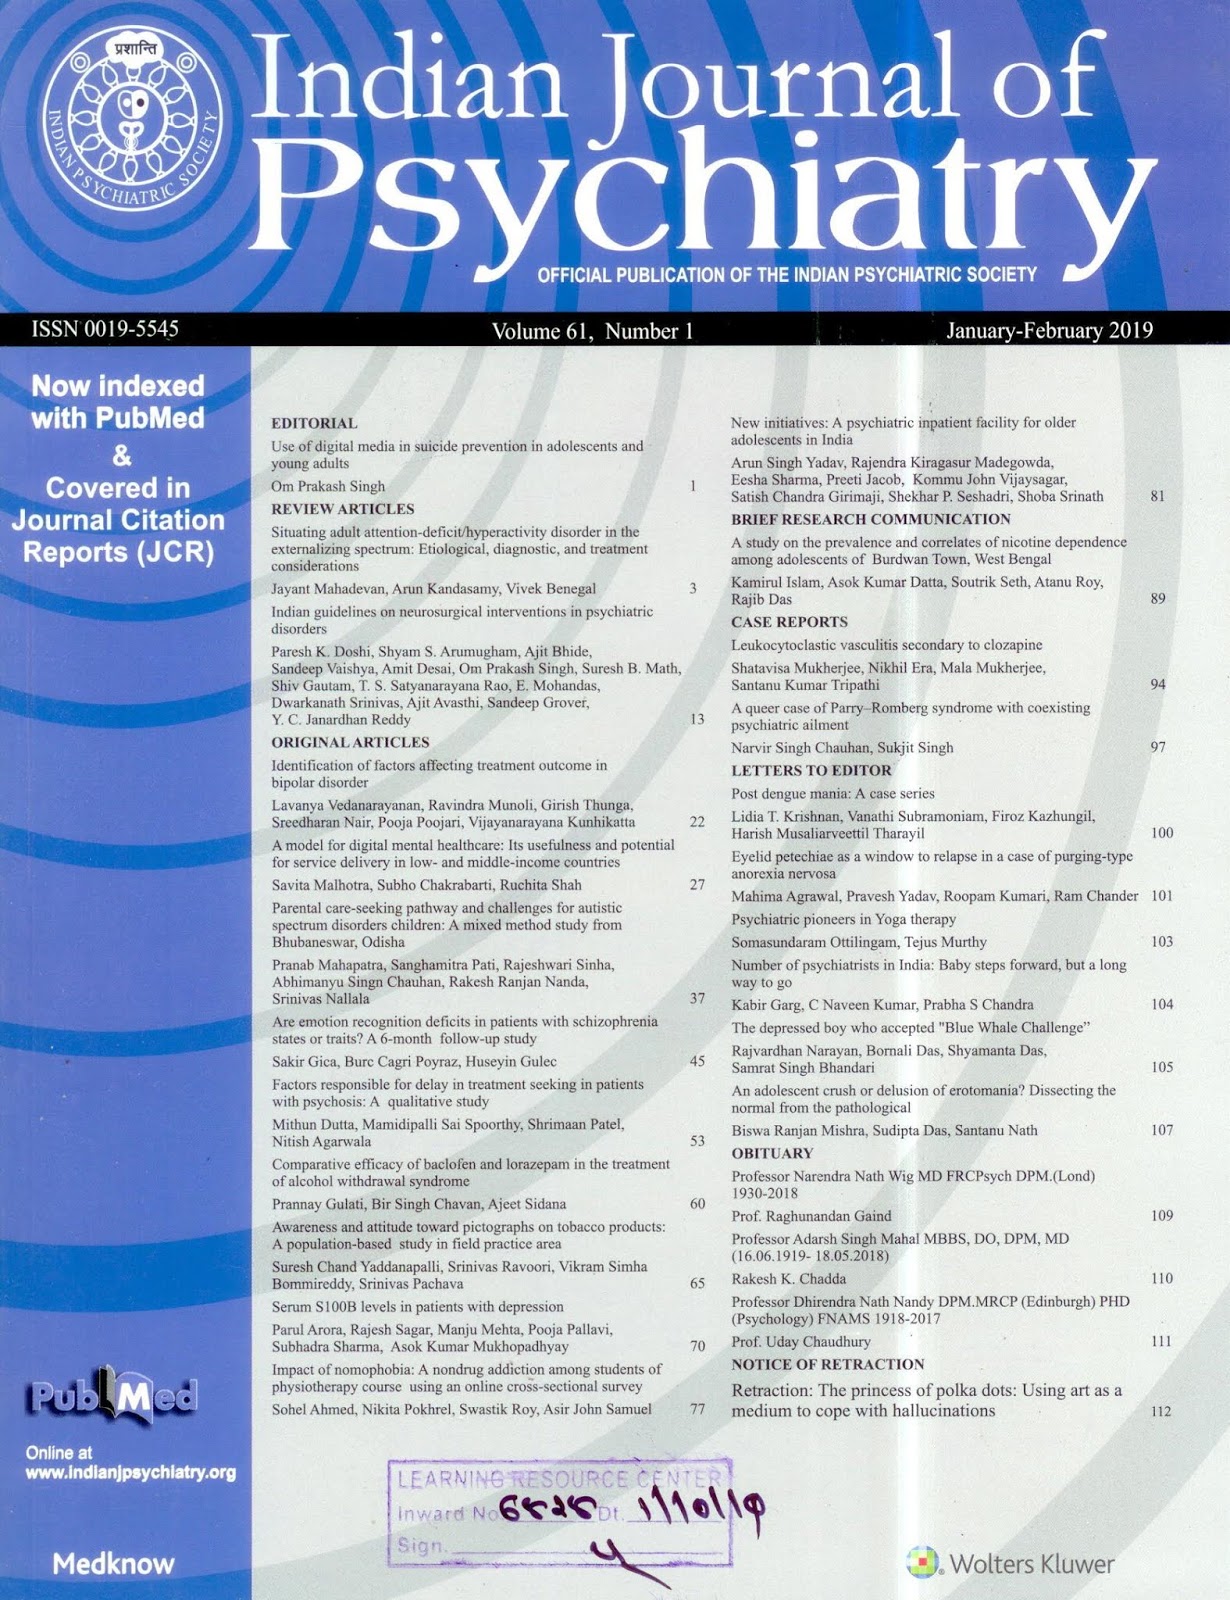 http://www.indianjpsychiatry.org/showBackIssue.asp?issn=0019-5545;year=2019;volume=61;issue=1;month=January-February